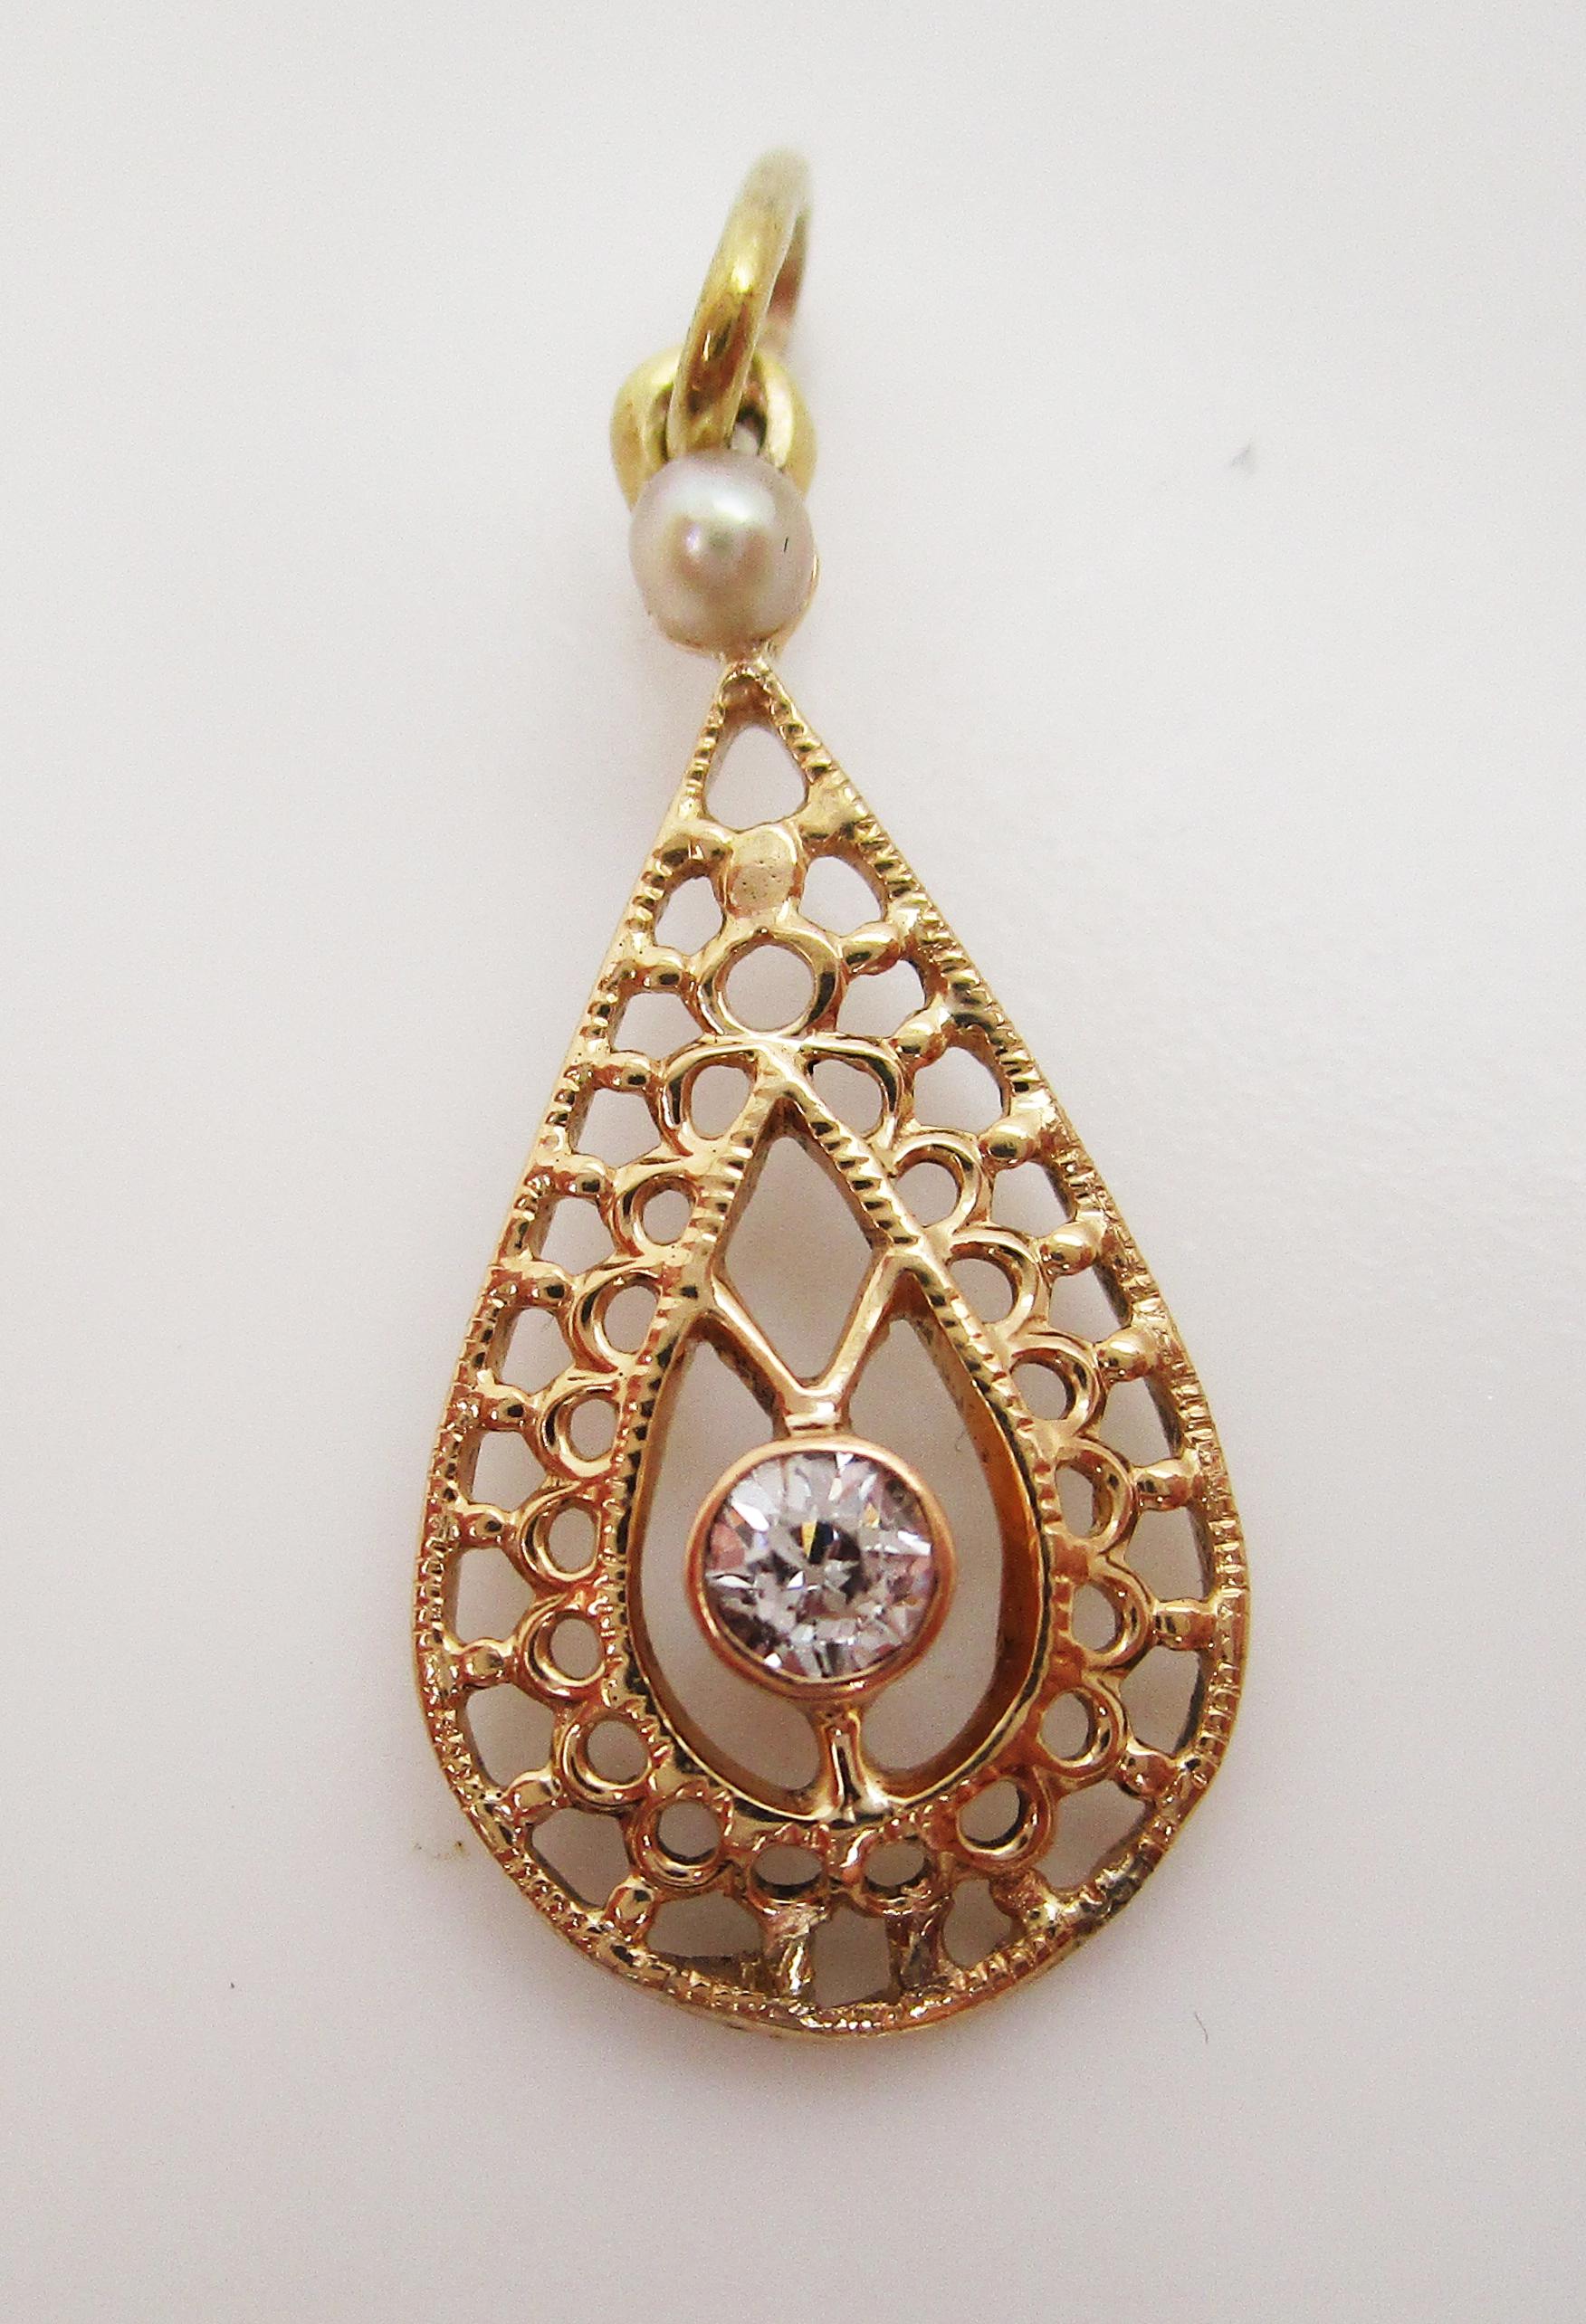 This lovely Edwardian pendant is in 14k yellow gold and features both a seed pearl and delicate diamond accent in an open pear design! The open design of the pendant creates a lacy look that is delicate and beautiful! At the top of the pendant sits